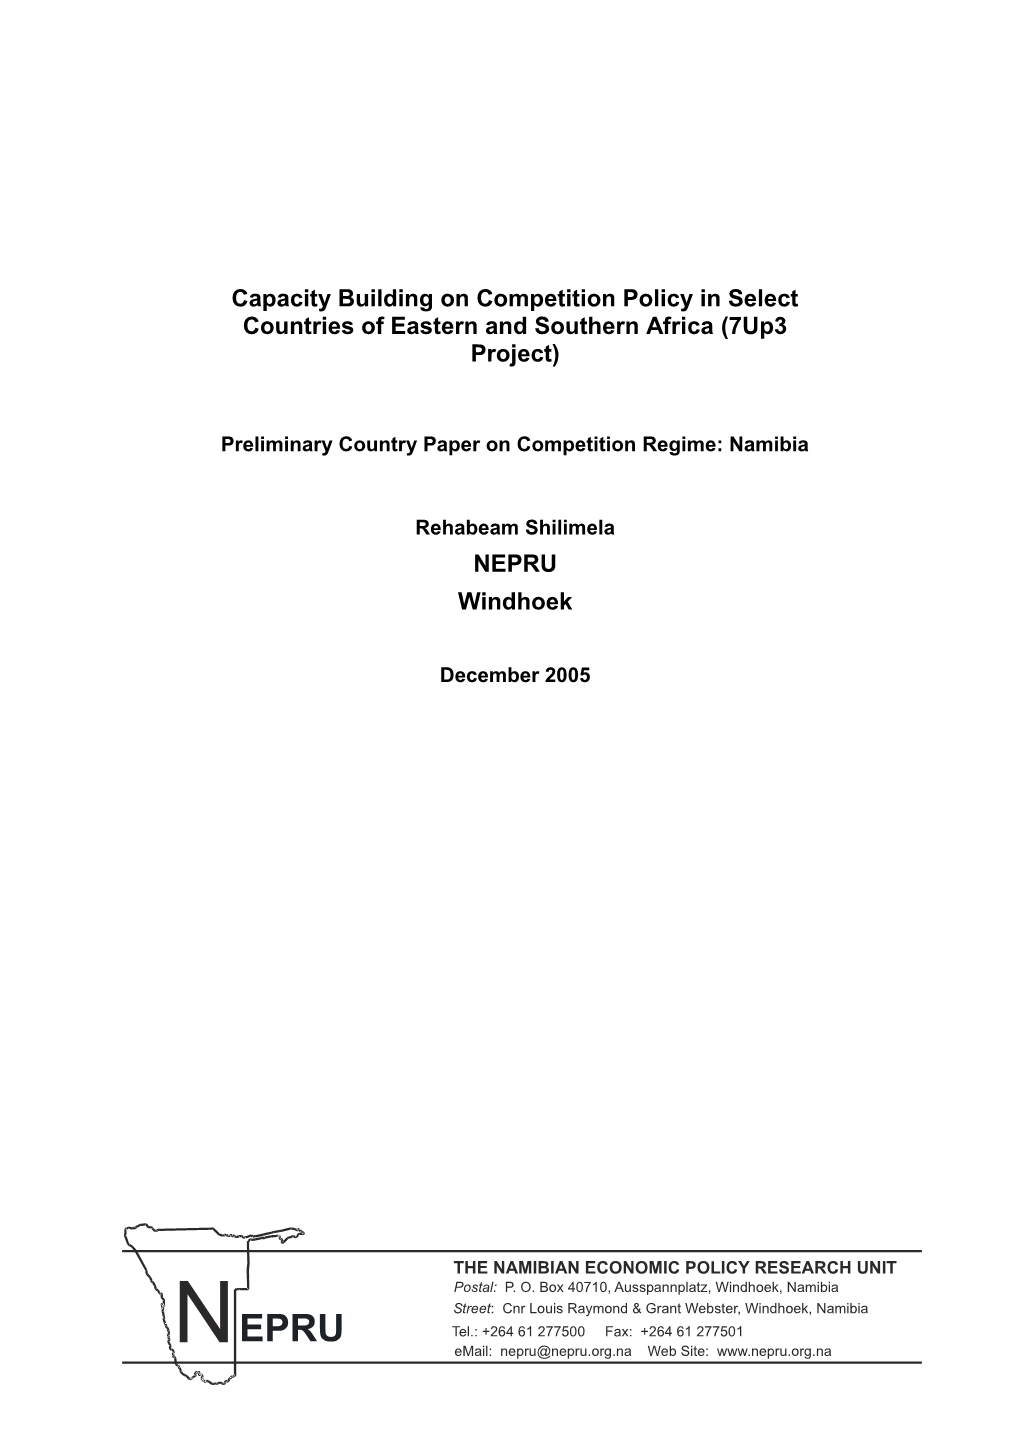 Capacity Building on Competition Policy in Select Countries of Eastern and Southern Africa